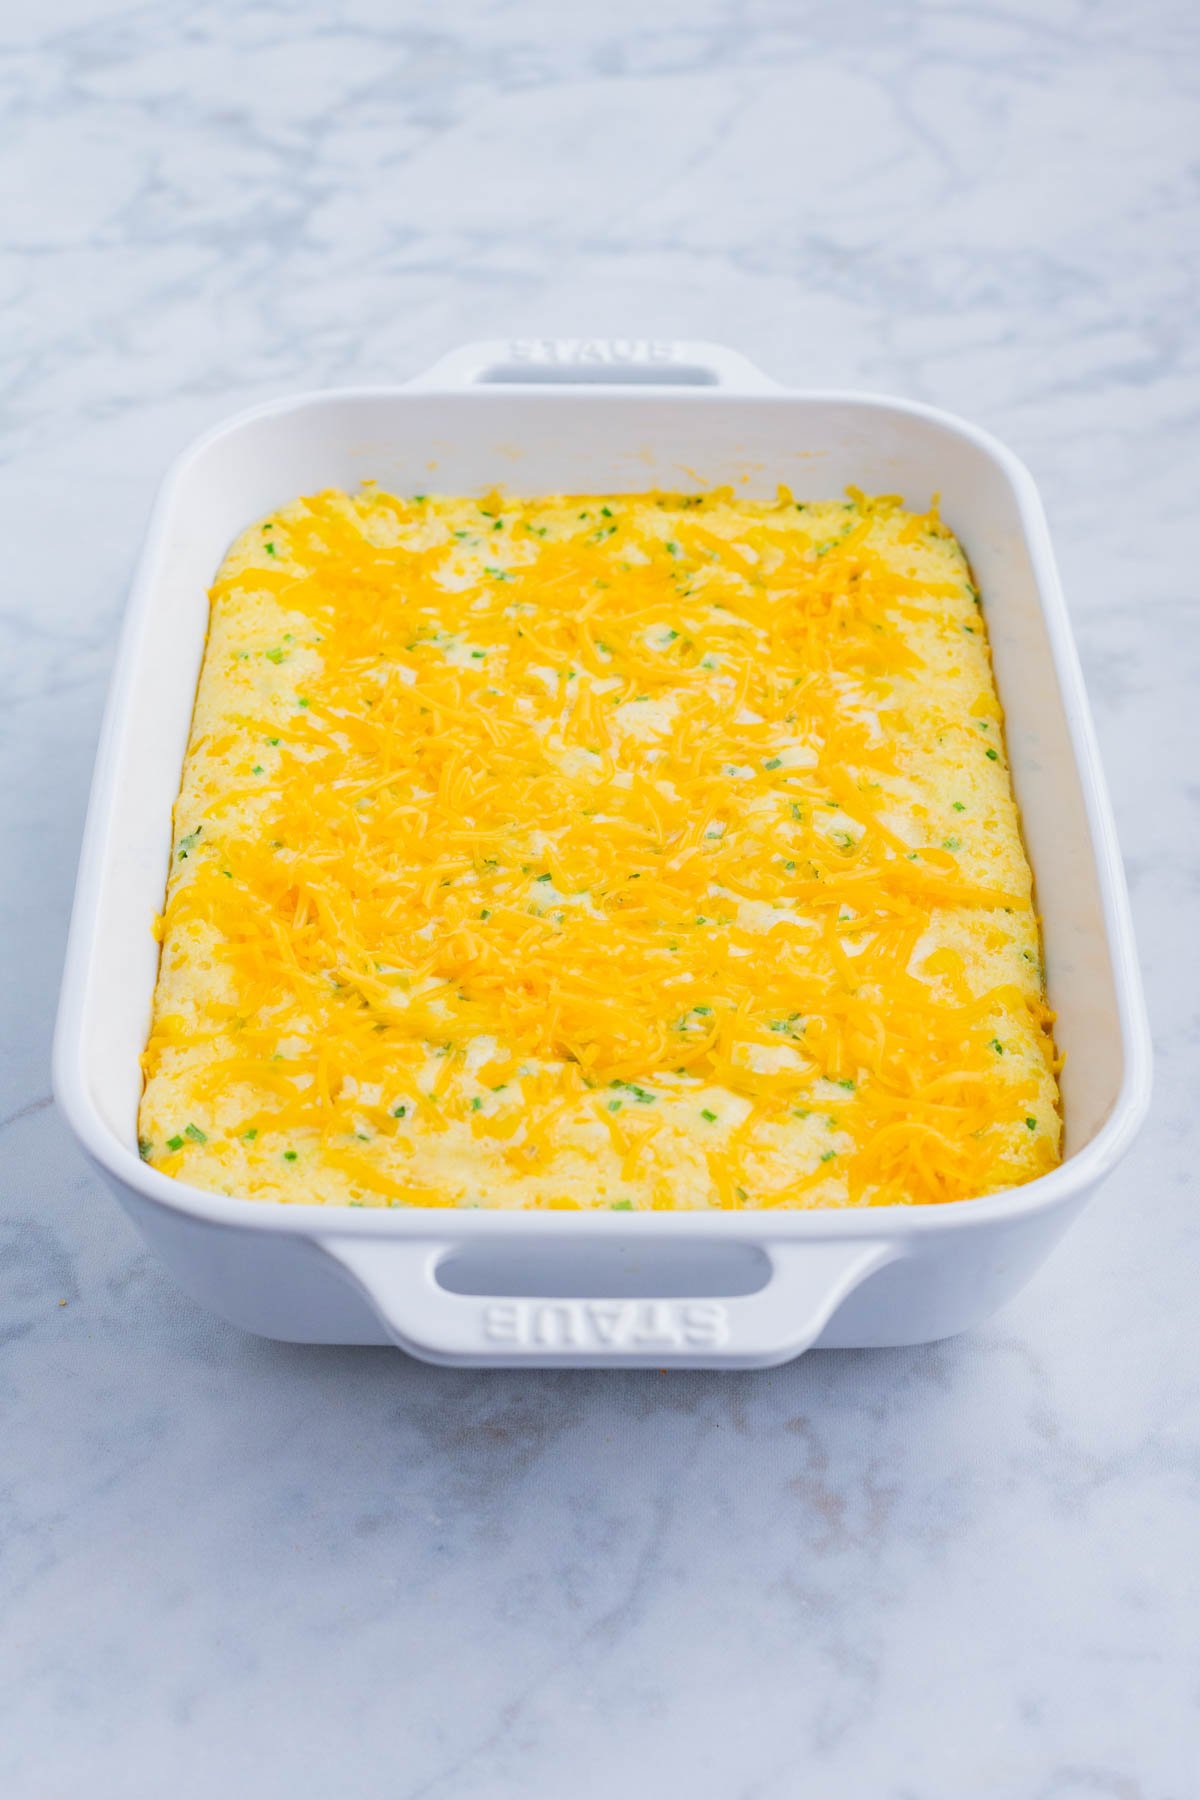 Corn souffle is topped with shredded cheese before baking.